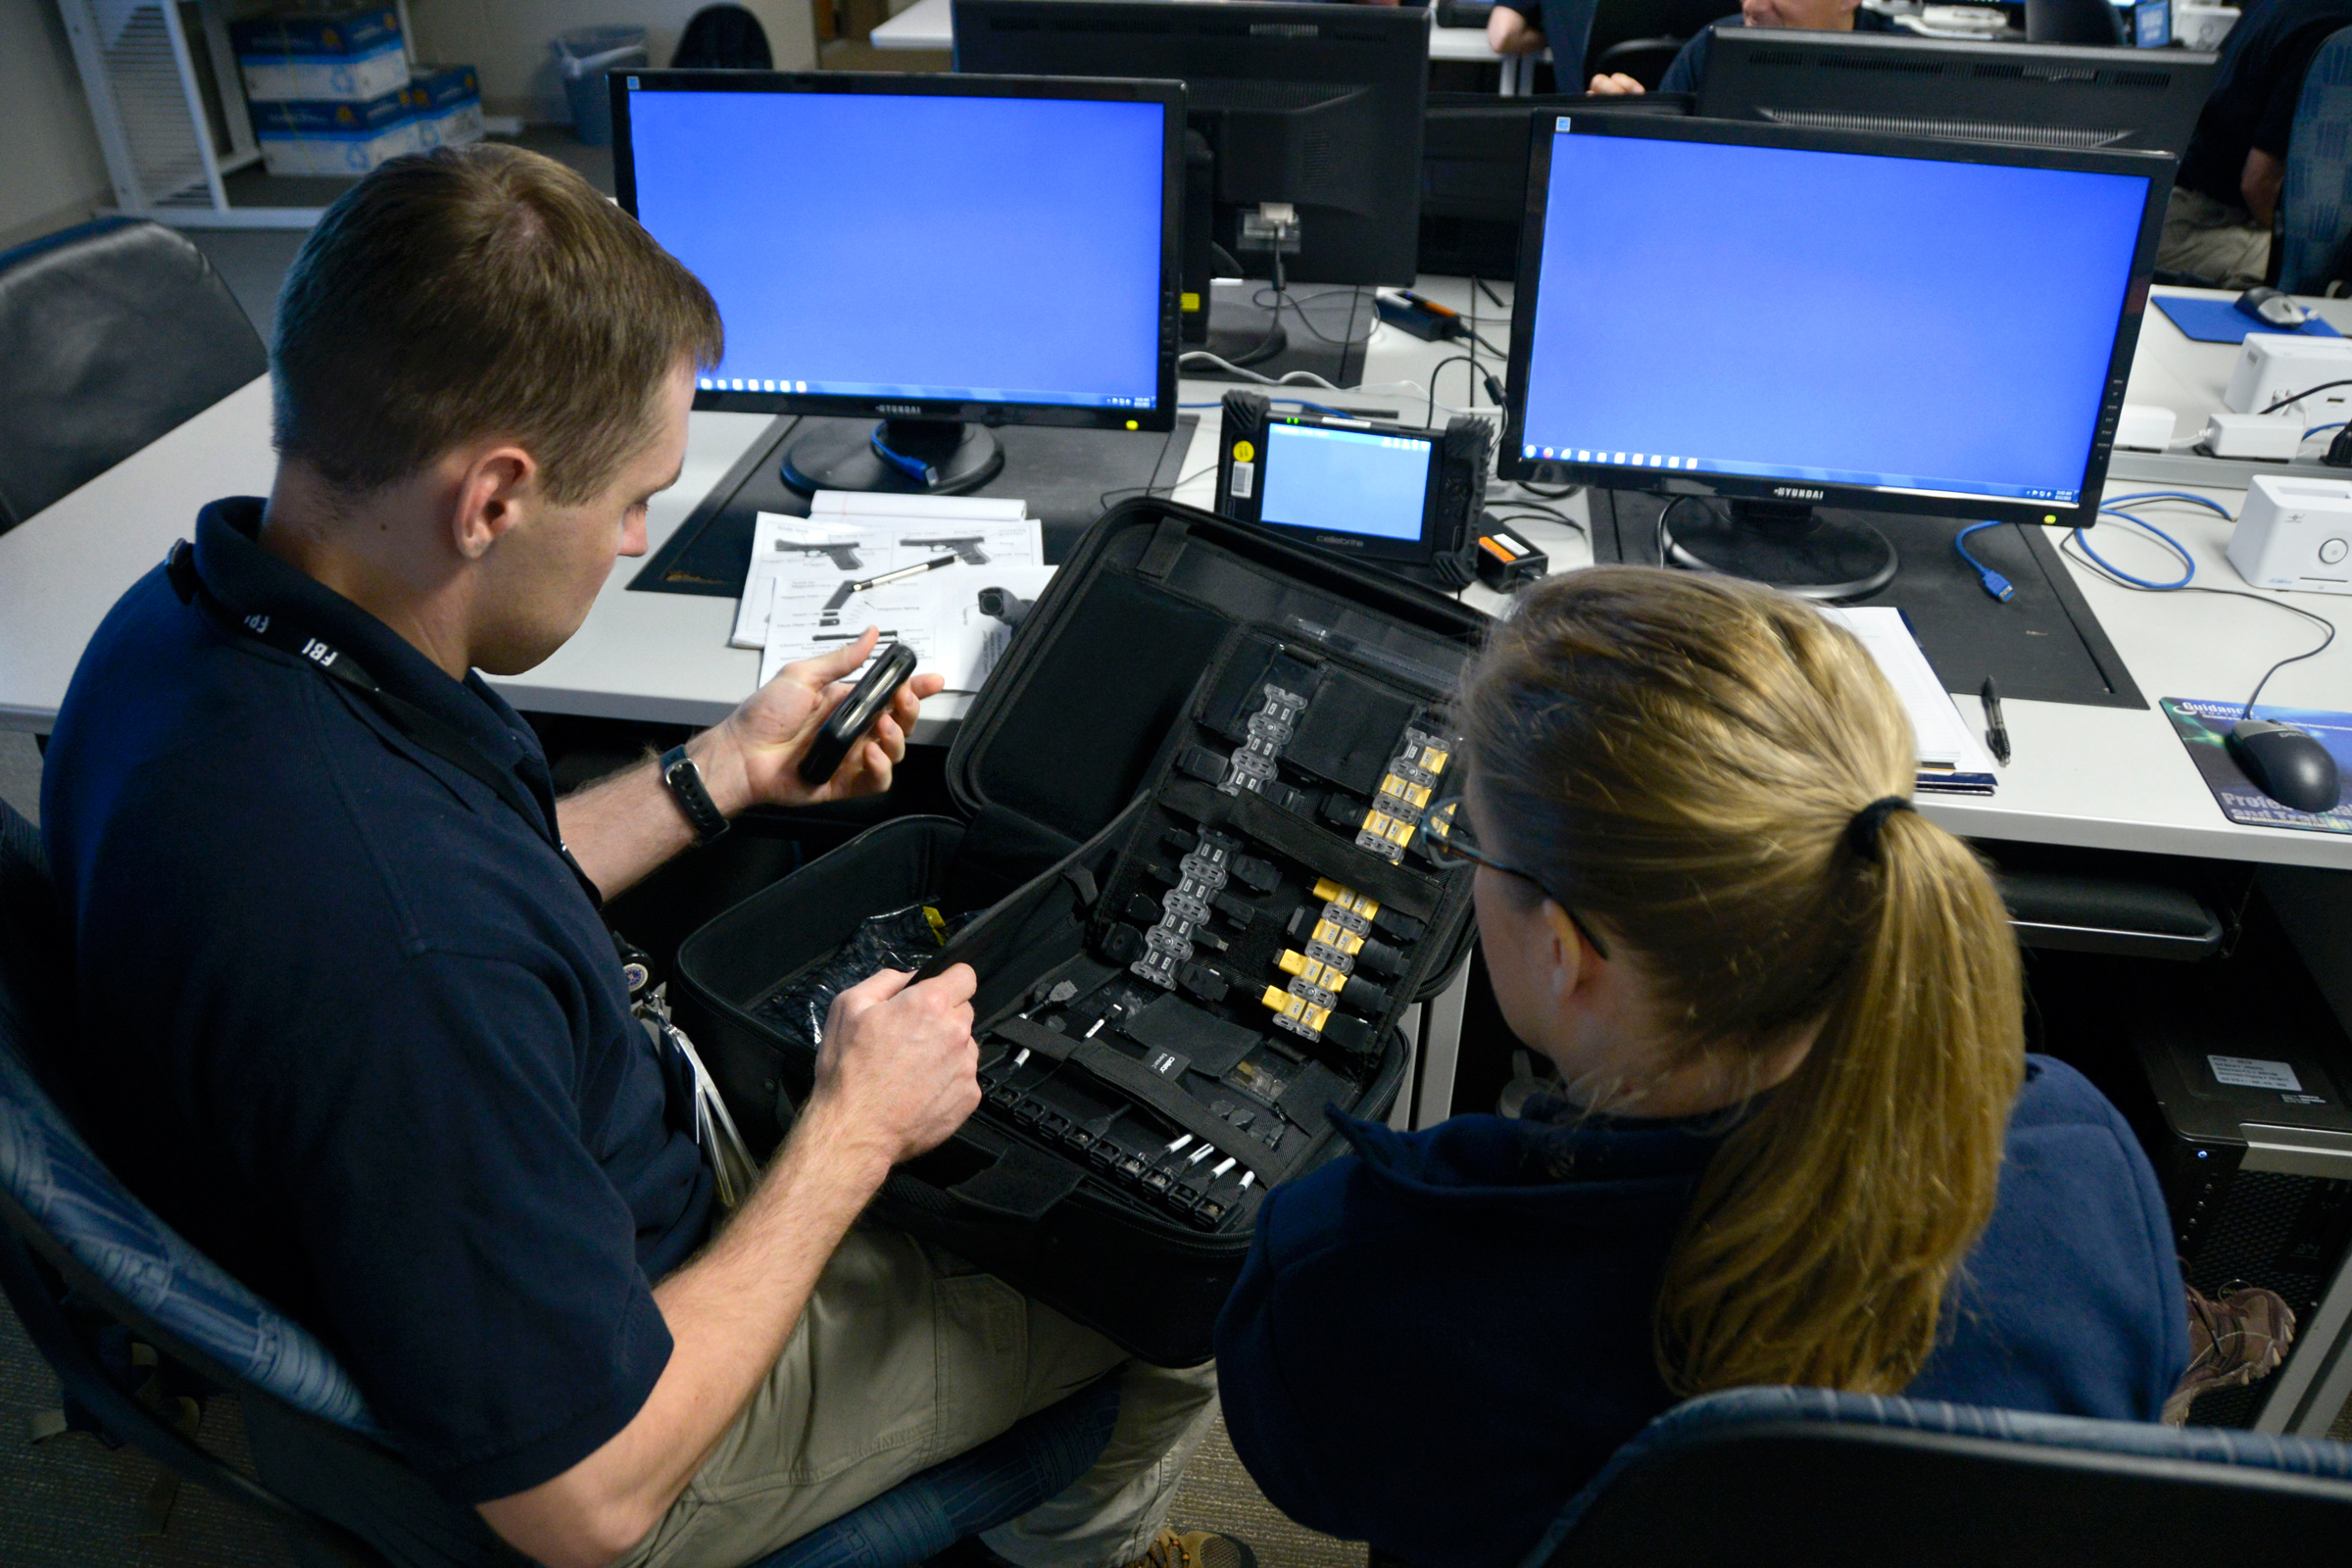 Today’s special agents and intelligence analysts graduating from the FBI Academy are beginning their first assignments fully prepared for collaborative work in the field thanks to the Basic Field Training Course launched in 2015. The new program offers an integrated curriculum that places new agent and intelligence analyst trainees together in a squad-like environment—the way agents and analysts work in actual FBI field offices.